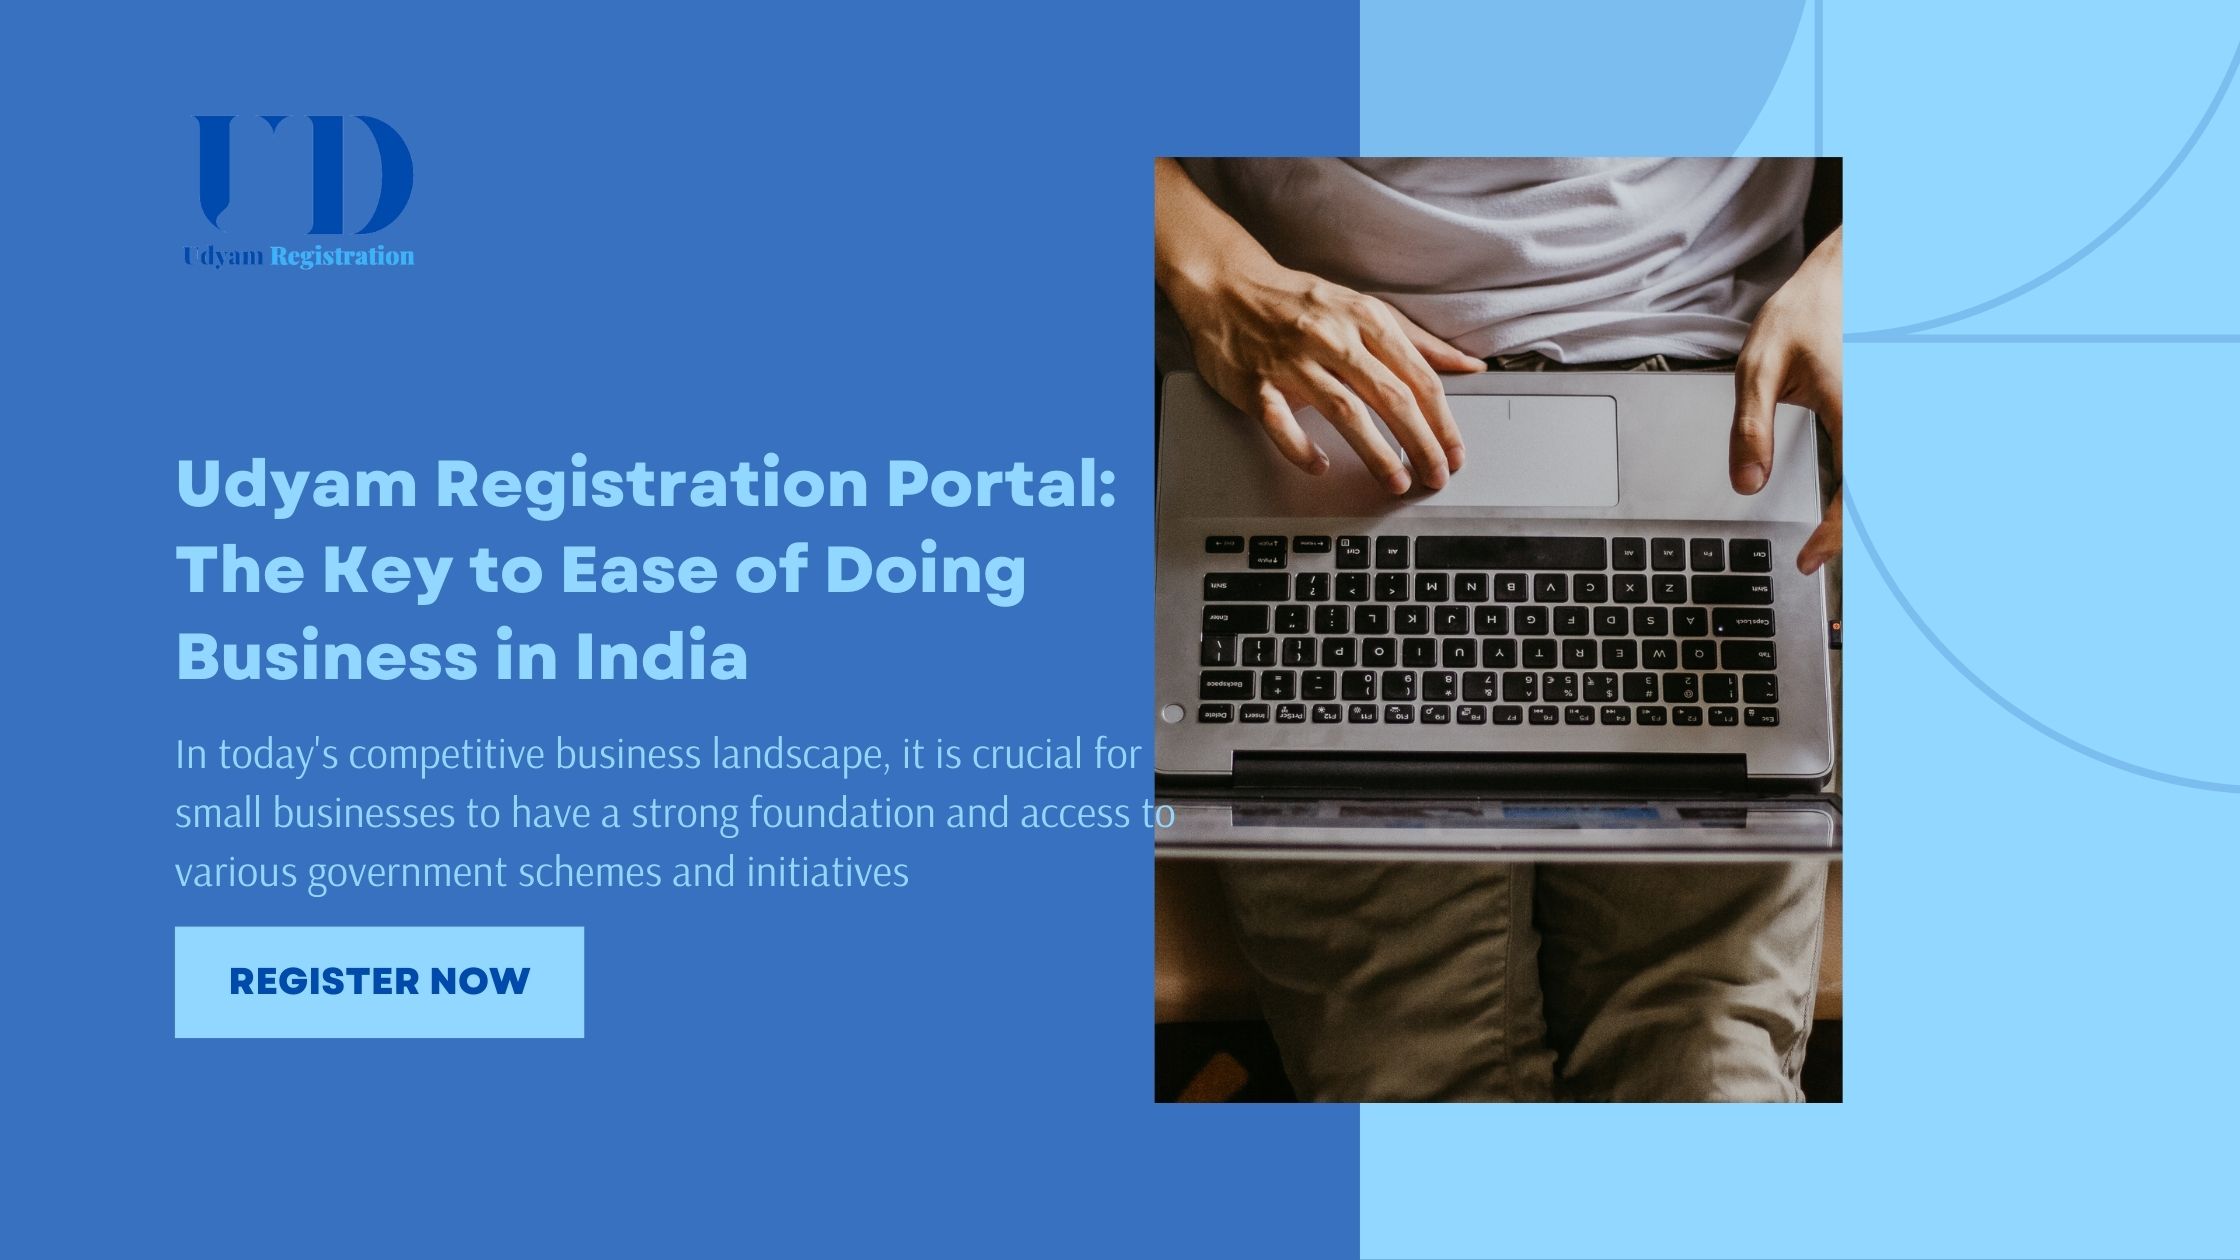 Udyam Registration Portal: The Key to Ease of Doing Business in India